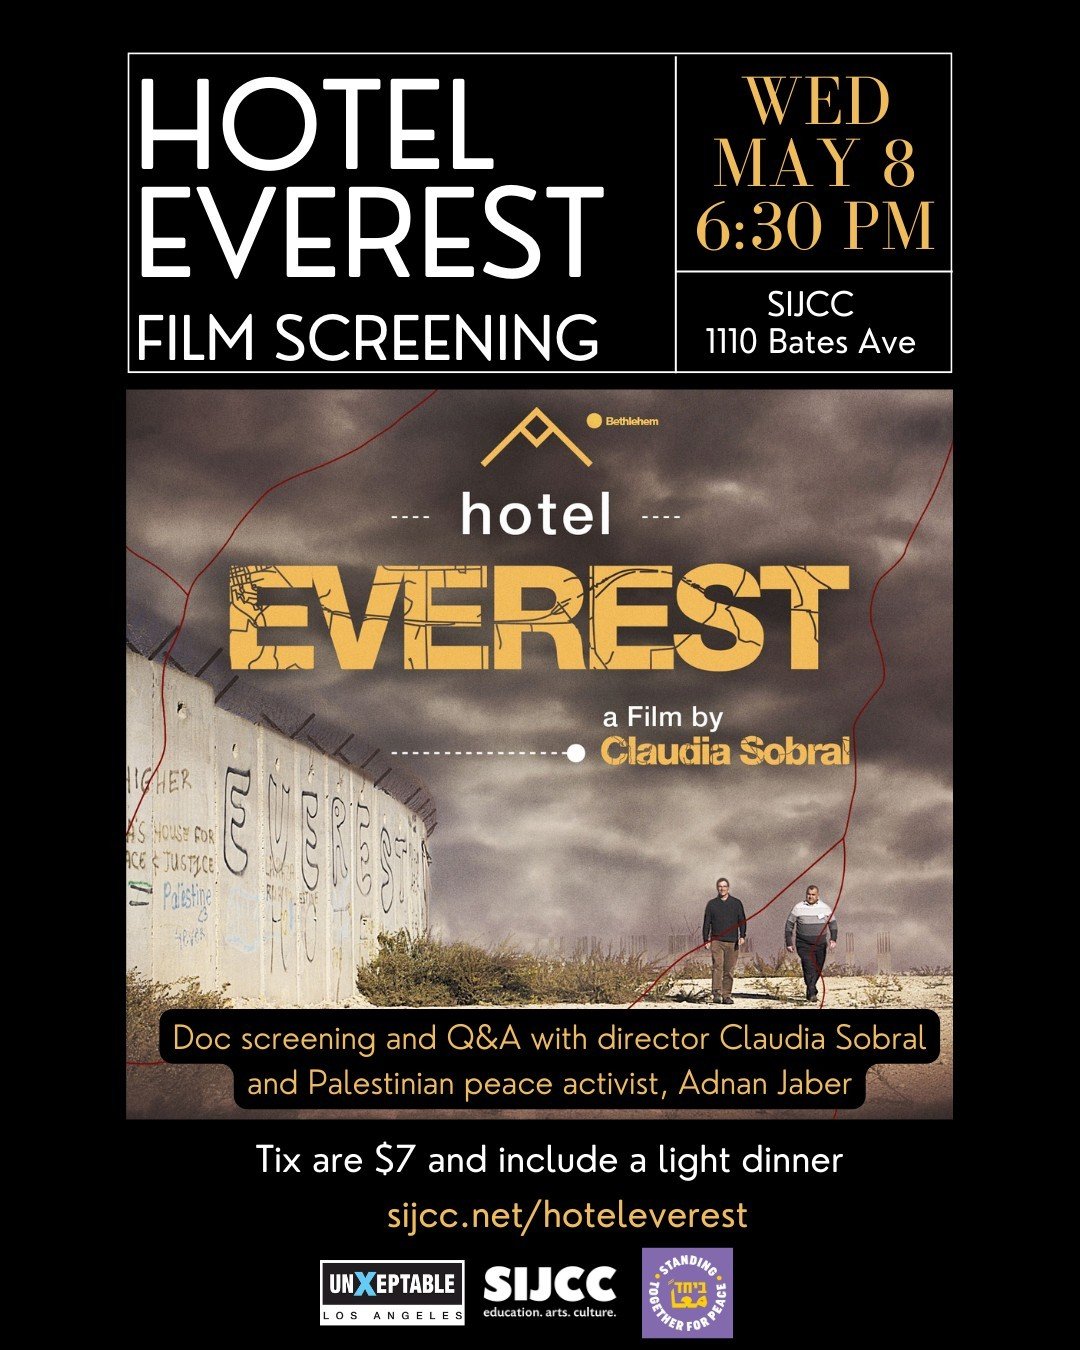 Join us on Wed, May 8th for a doc screening and discussion of the 2017 documentary &quot;Hotel Everest&quot;.⁠
⁠
Hotel Everest is a 2017 documentary about courageous Israelis and Palestinians who came together at the Hotel Everest in 2014, a safe hav